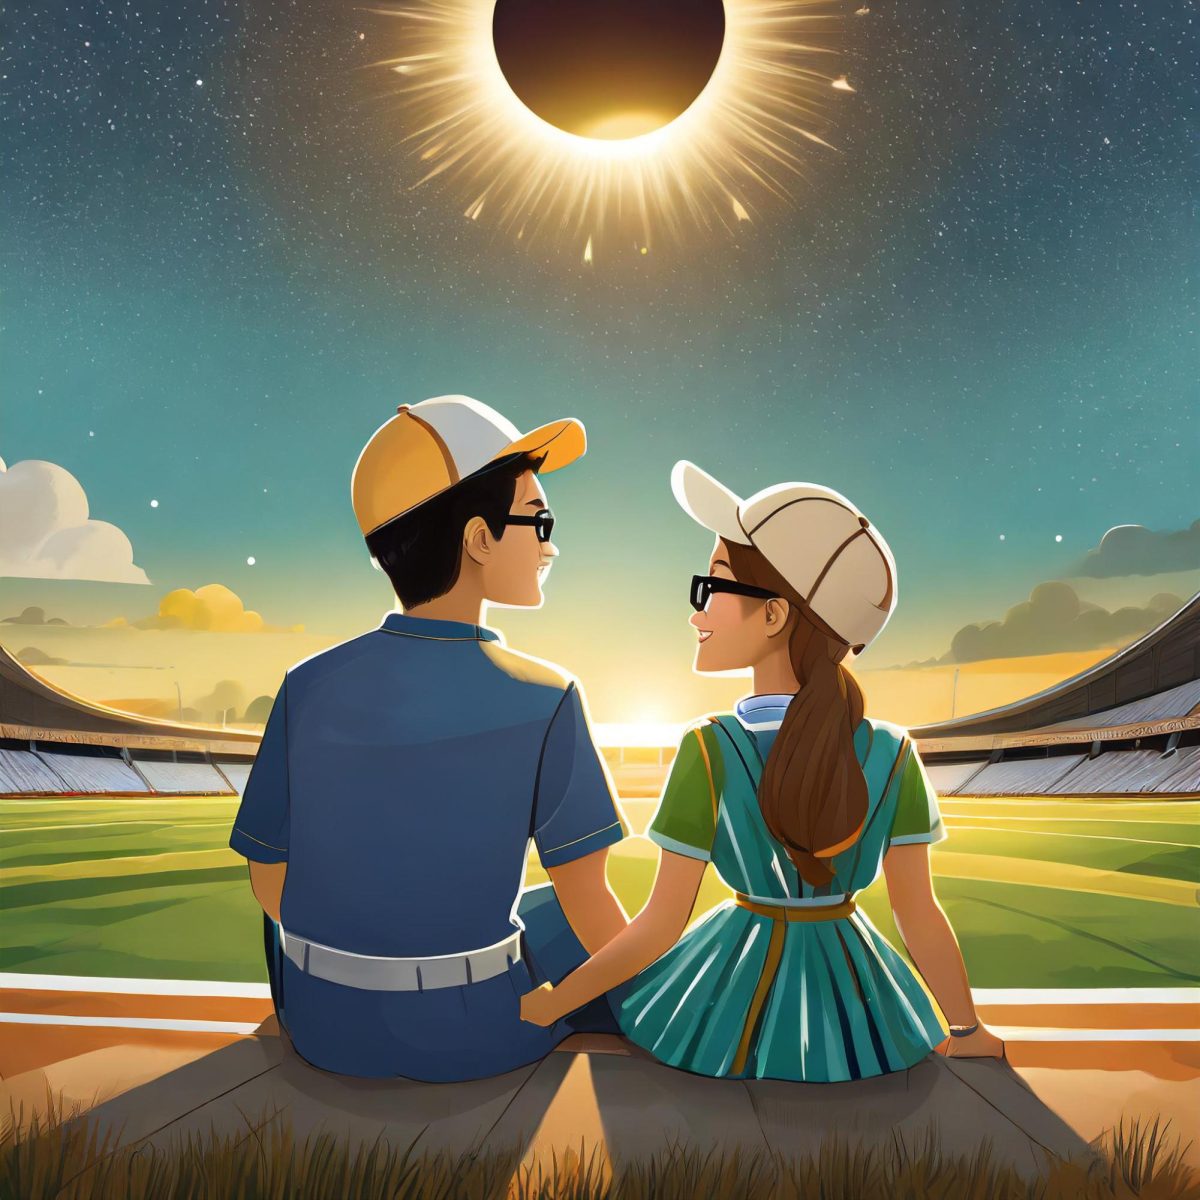 Friends sit together to watch the Solar Eclipse to make the memories that last a lifetime. 
(Image created by Firefly Adobe by Kelsey Sweet)